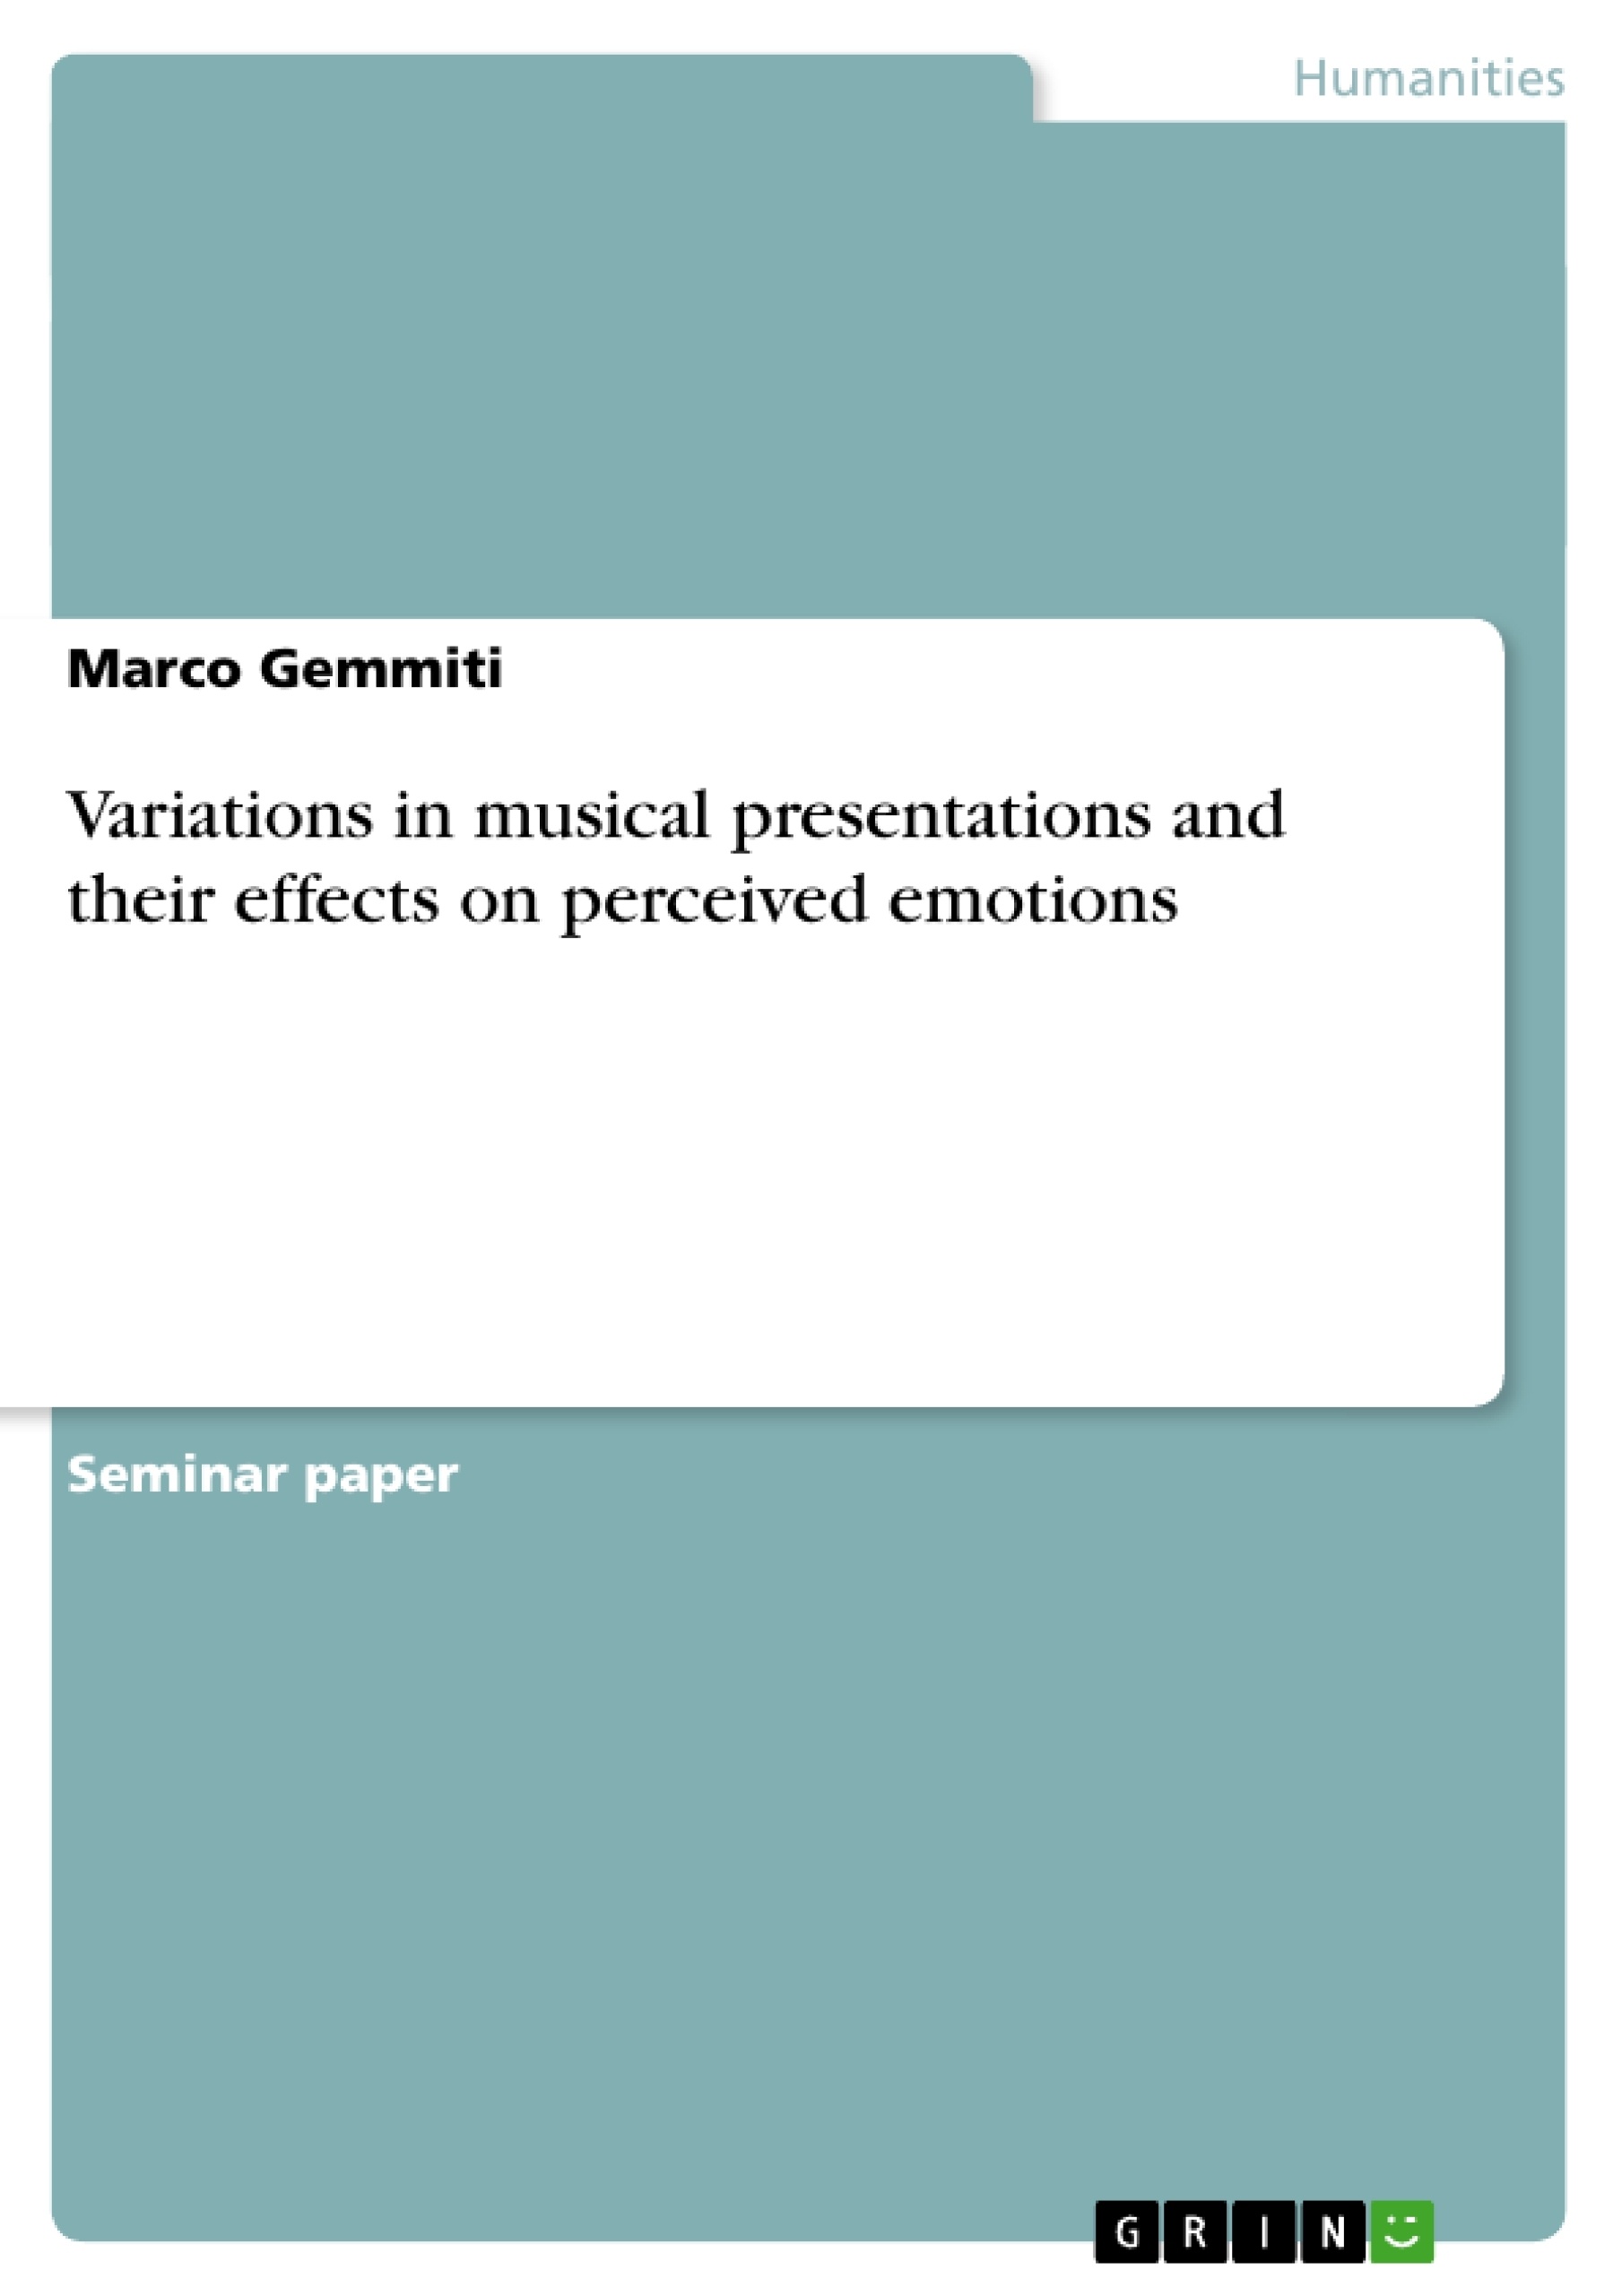 Title: Variations in musical presentations and their effects on perceived emotions